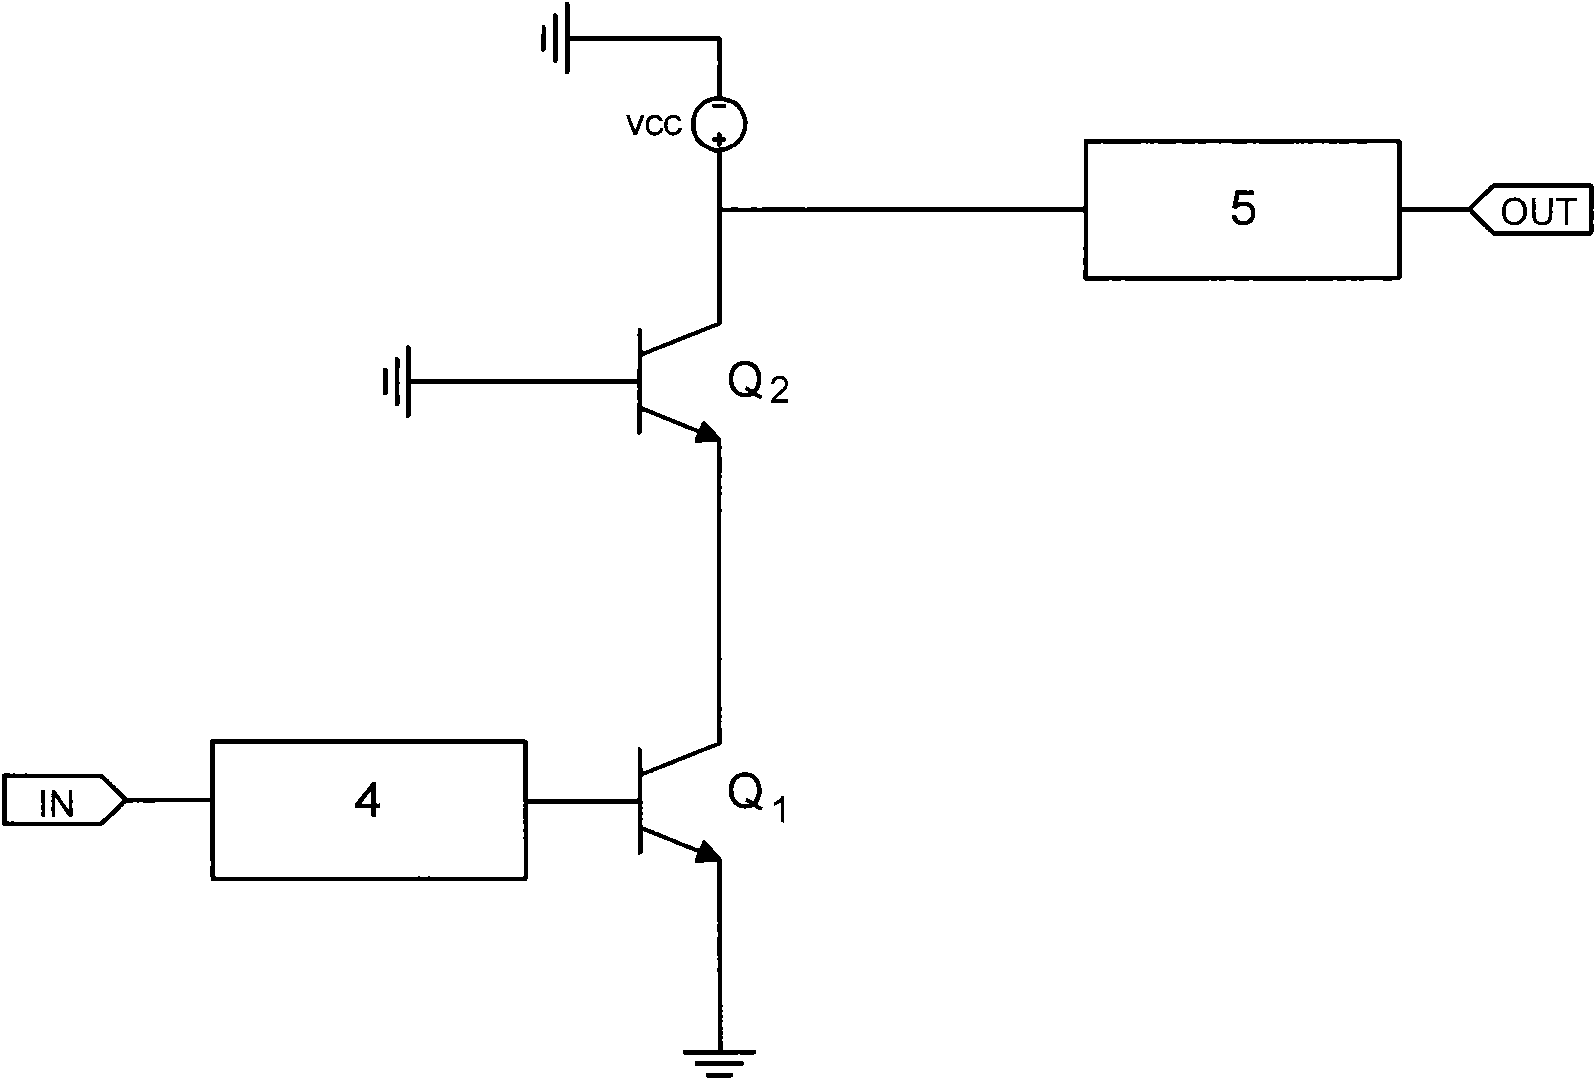 Circuit for improving linearity and power added efficiency of power amplifier